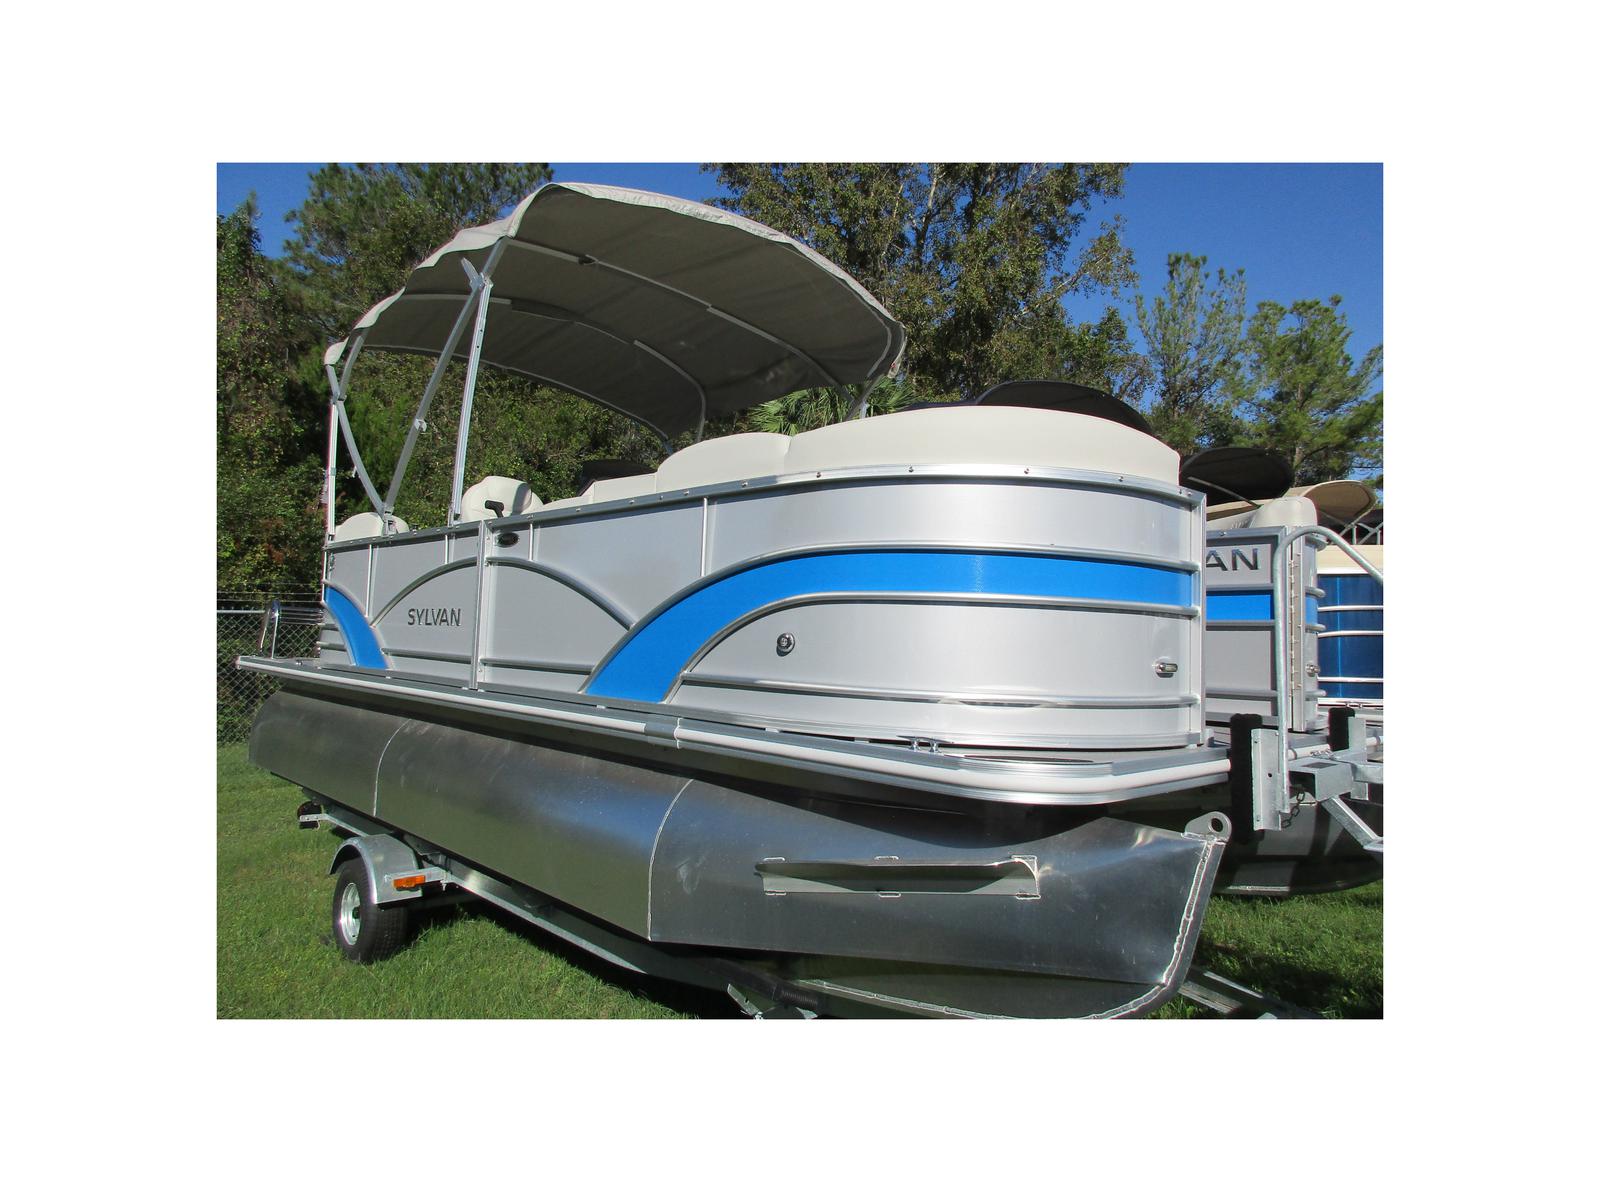 Zf | New and Used Boats for Sale in Florida